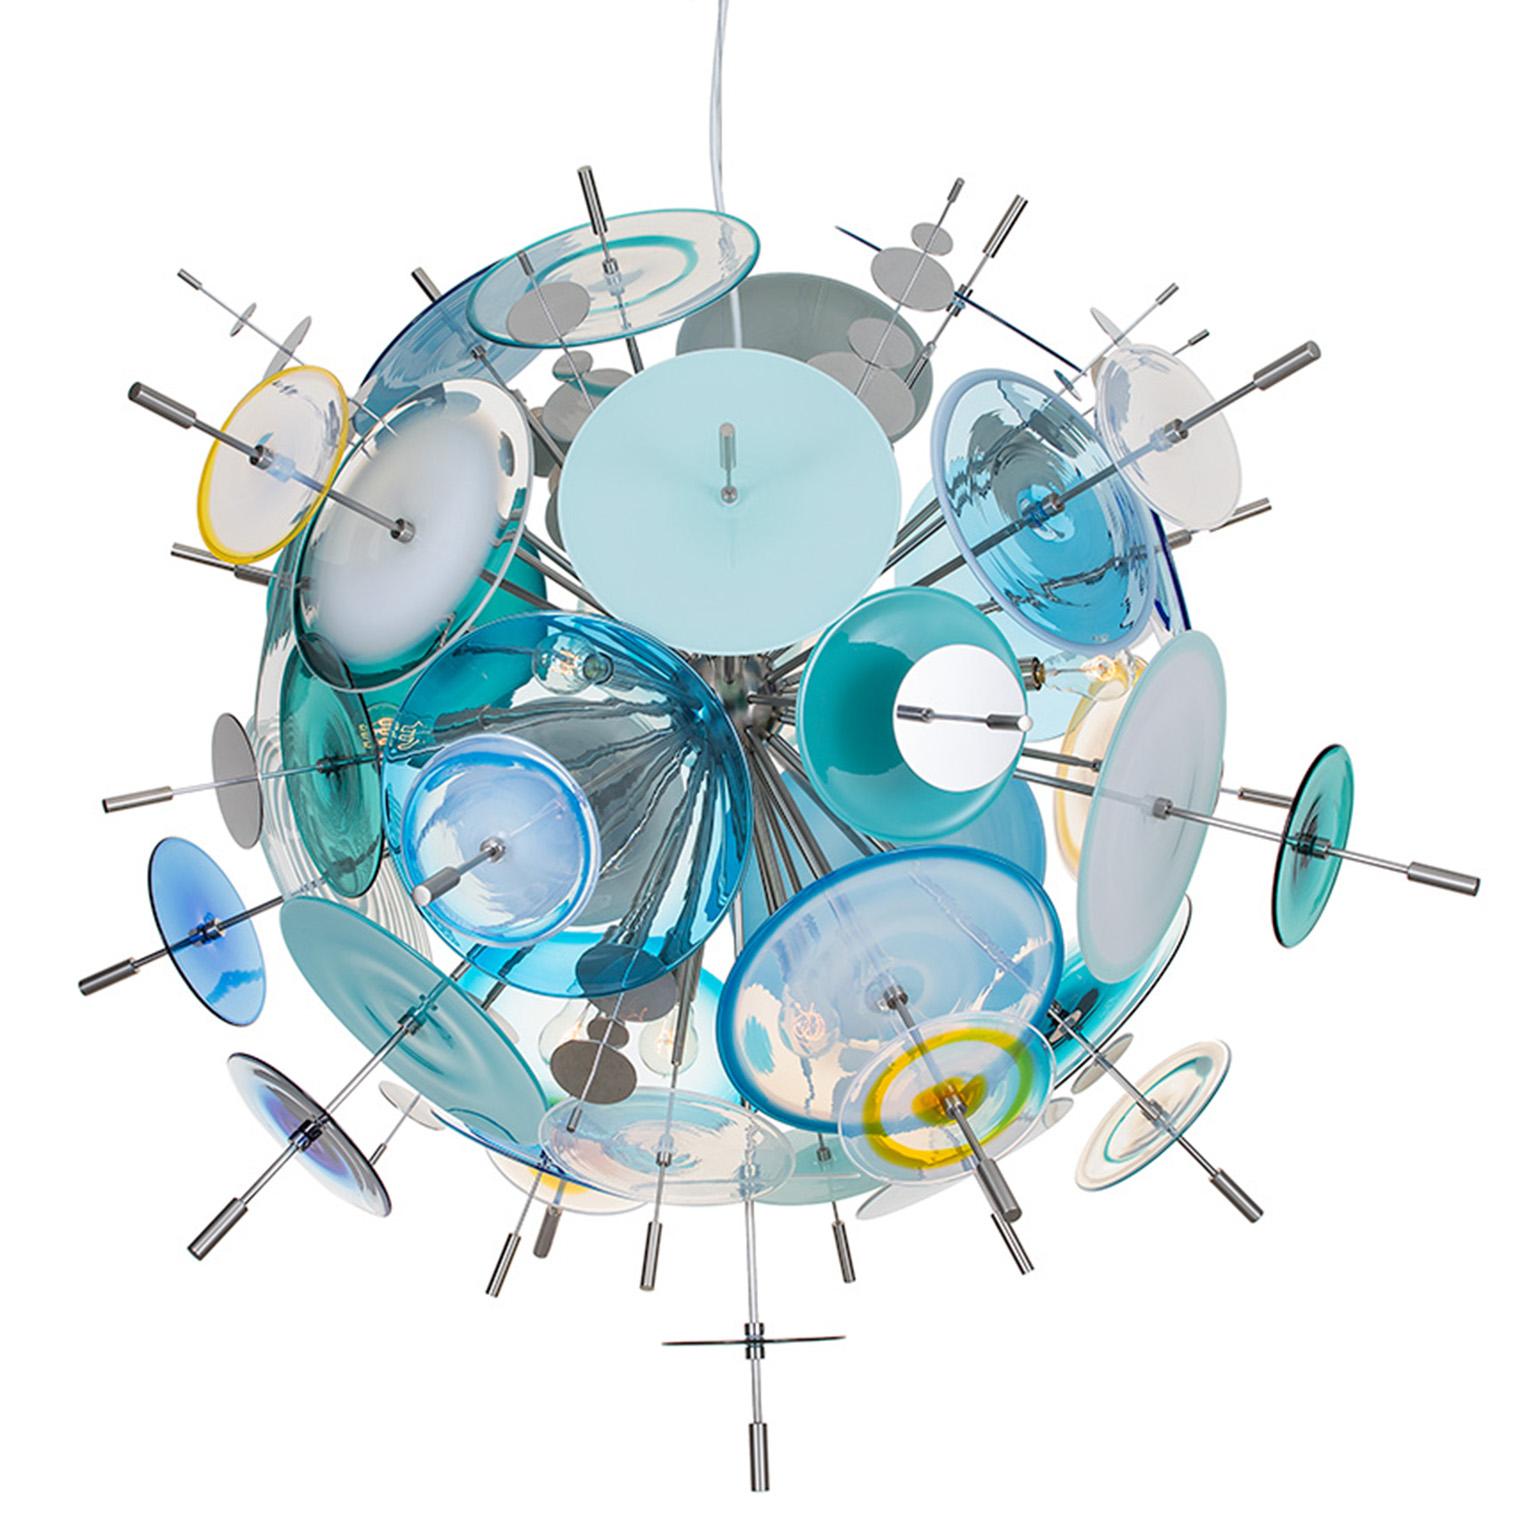 The Confetti glass chandelier features handblown glass discs in a variety of color palates with a choice of metallic accents. Pictured: ultramarine, sky blue, turquoise, emerald, aqua, grey, gold, opaline, white and clear glass. 

Avram Rusu